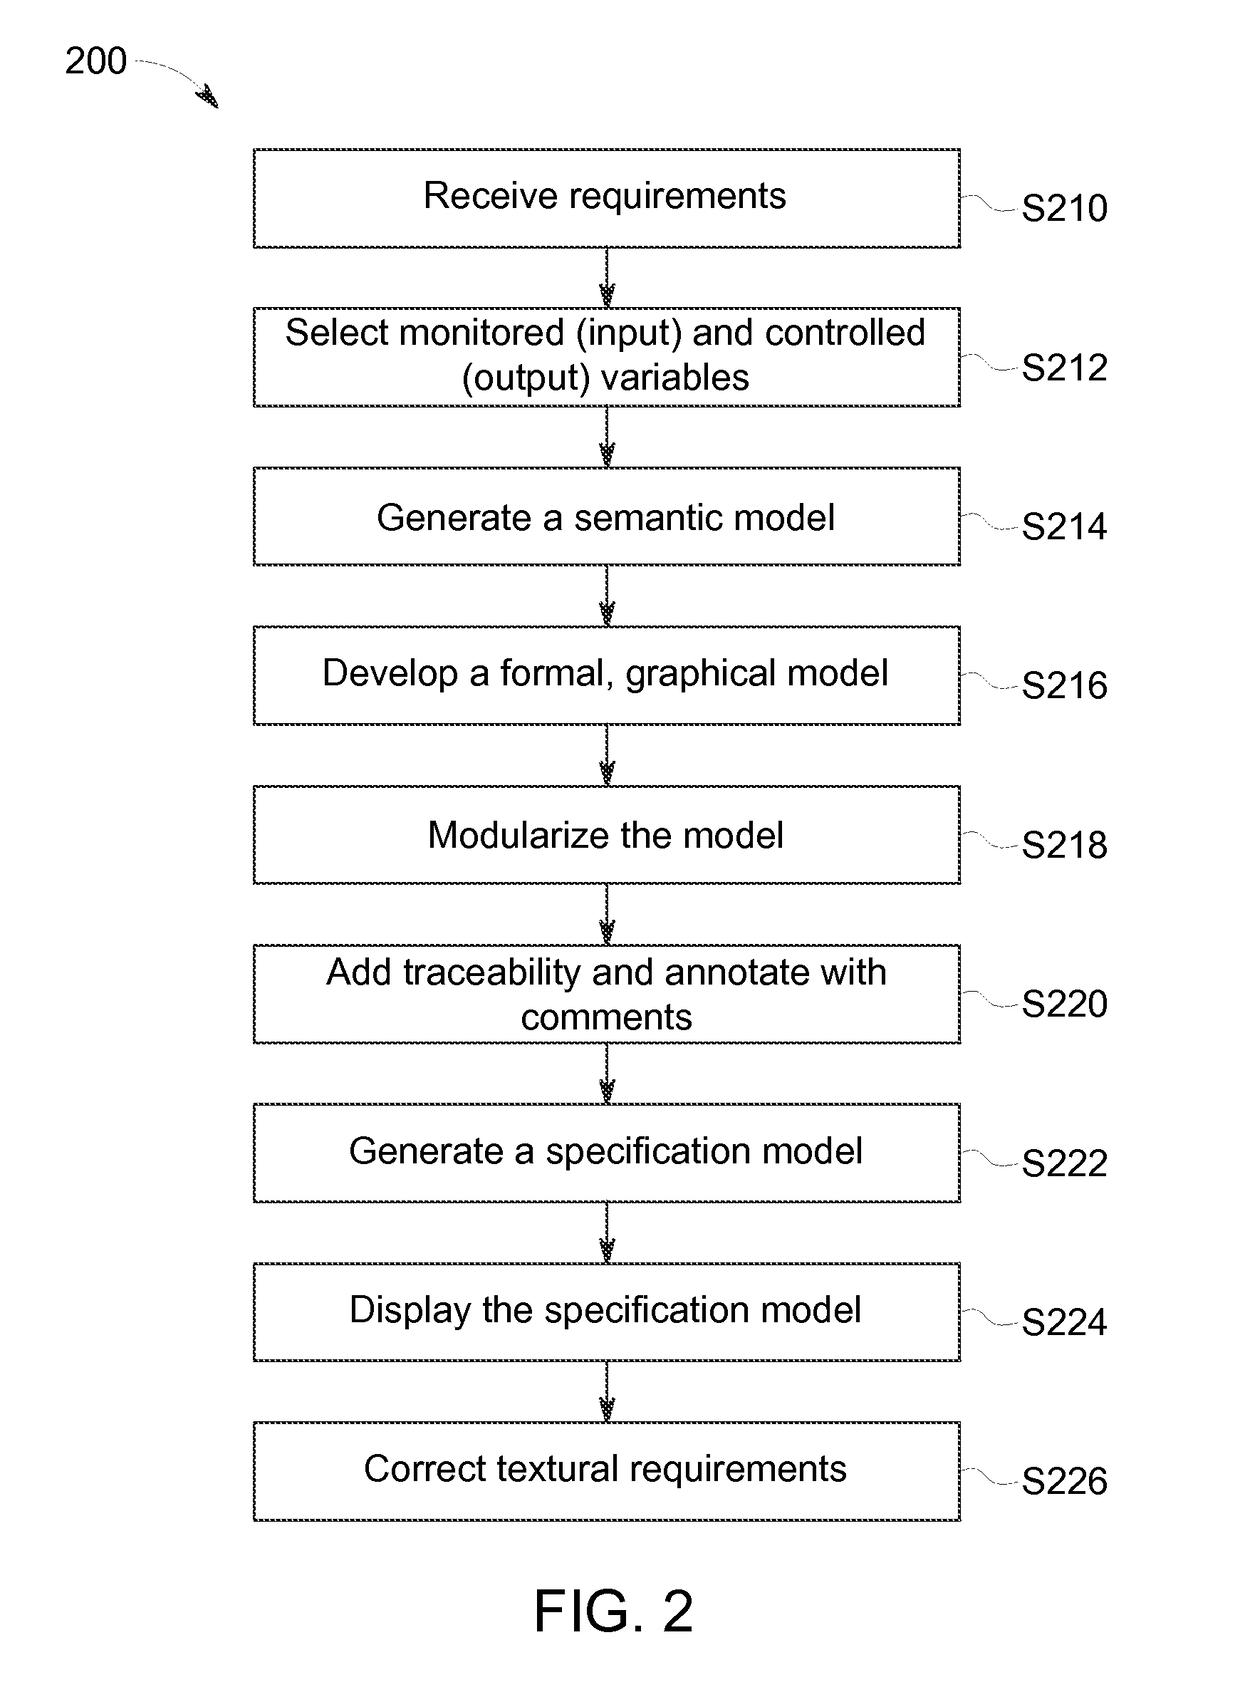 Method and system of software specification modeling